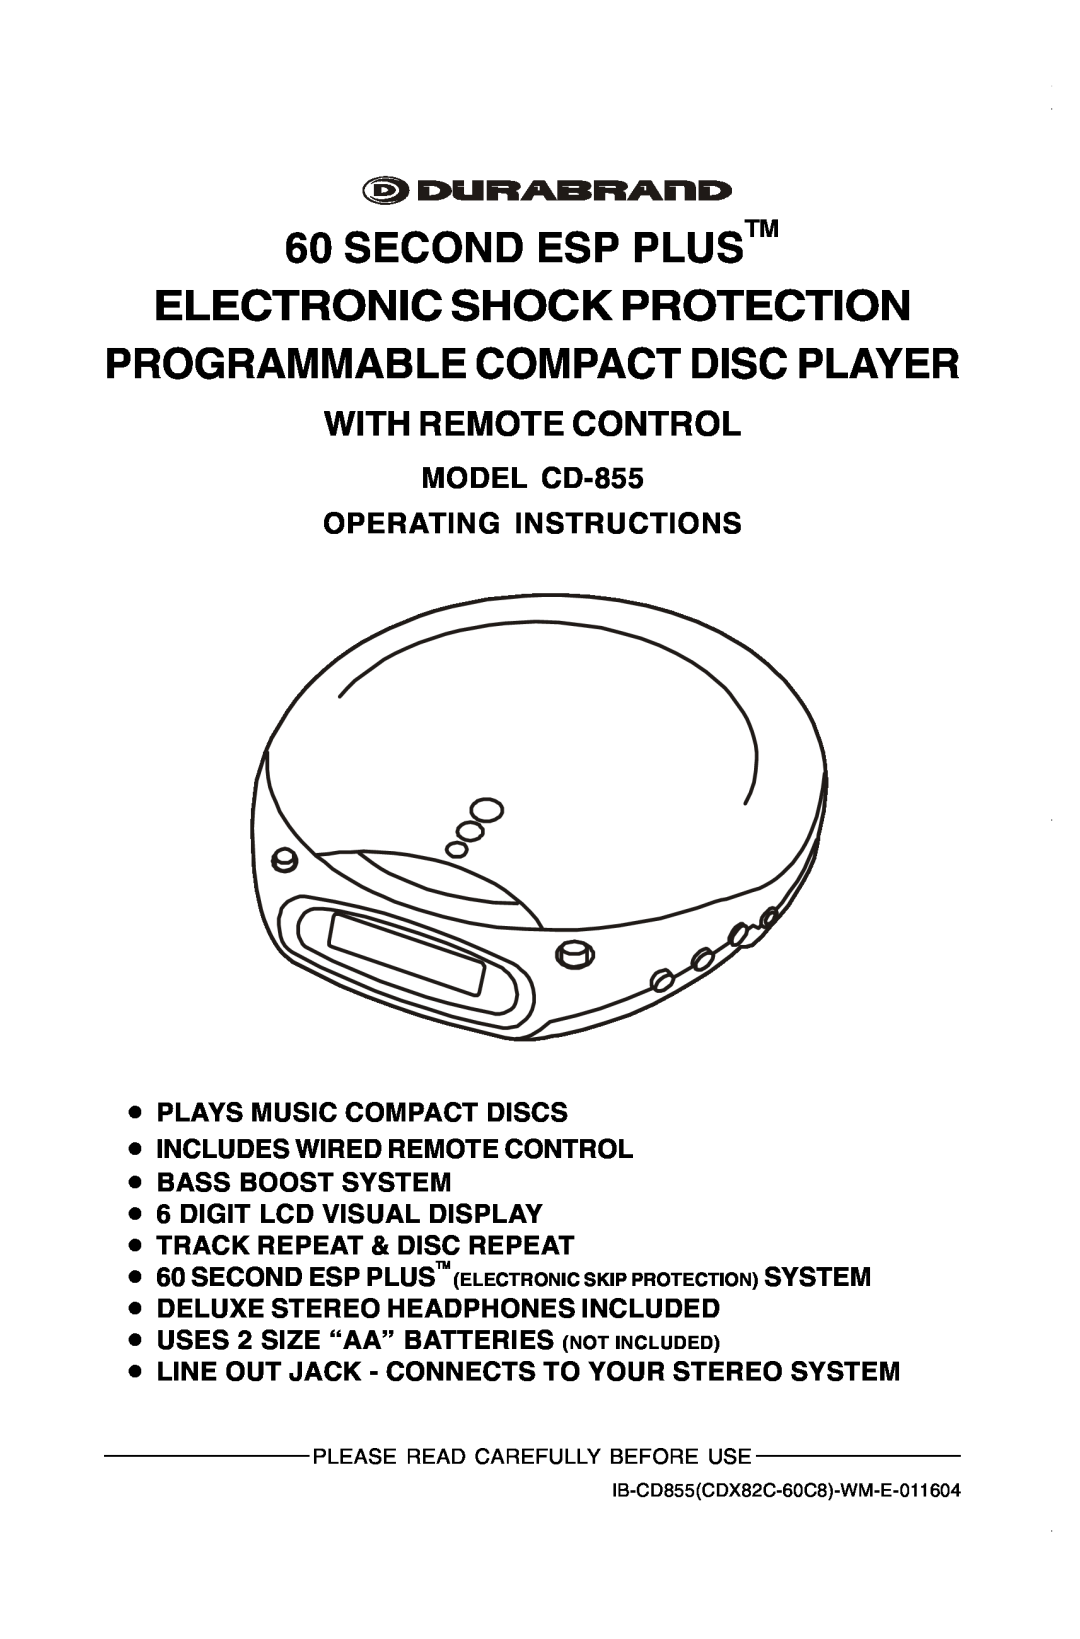 Durabrand manual MODEL CD-855 OPERATING INSTRUCTIONS, 60SECOND ESP PLUSTM ELECTRONIC SHOCK PROTECTION 